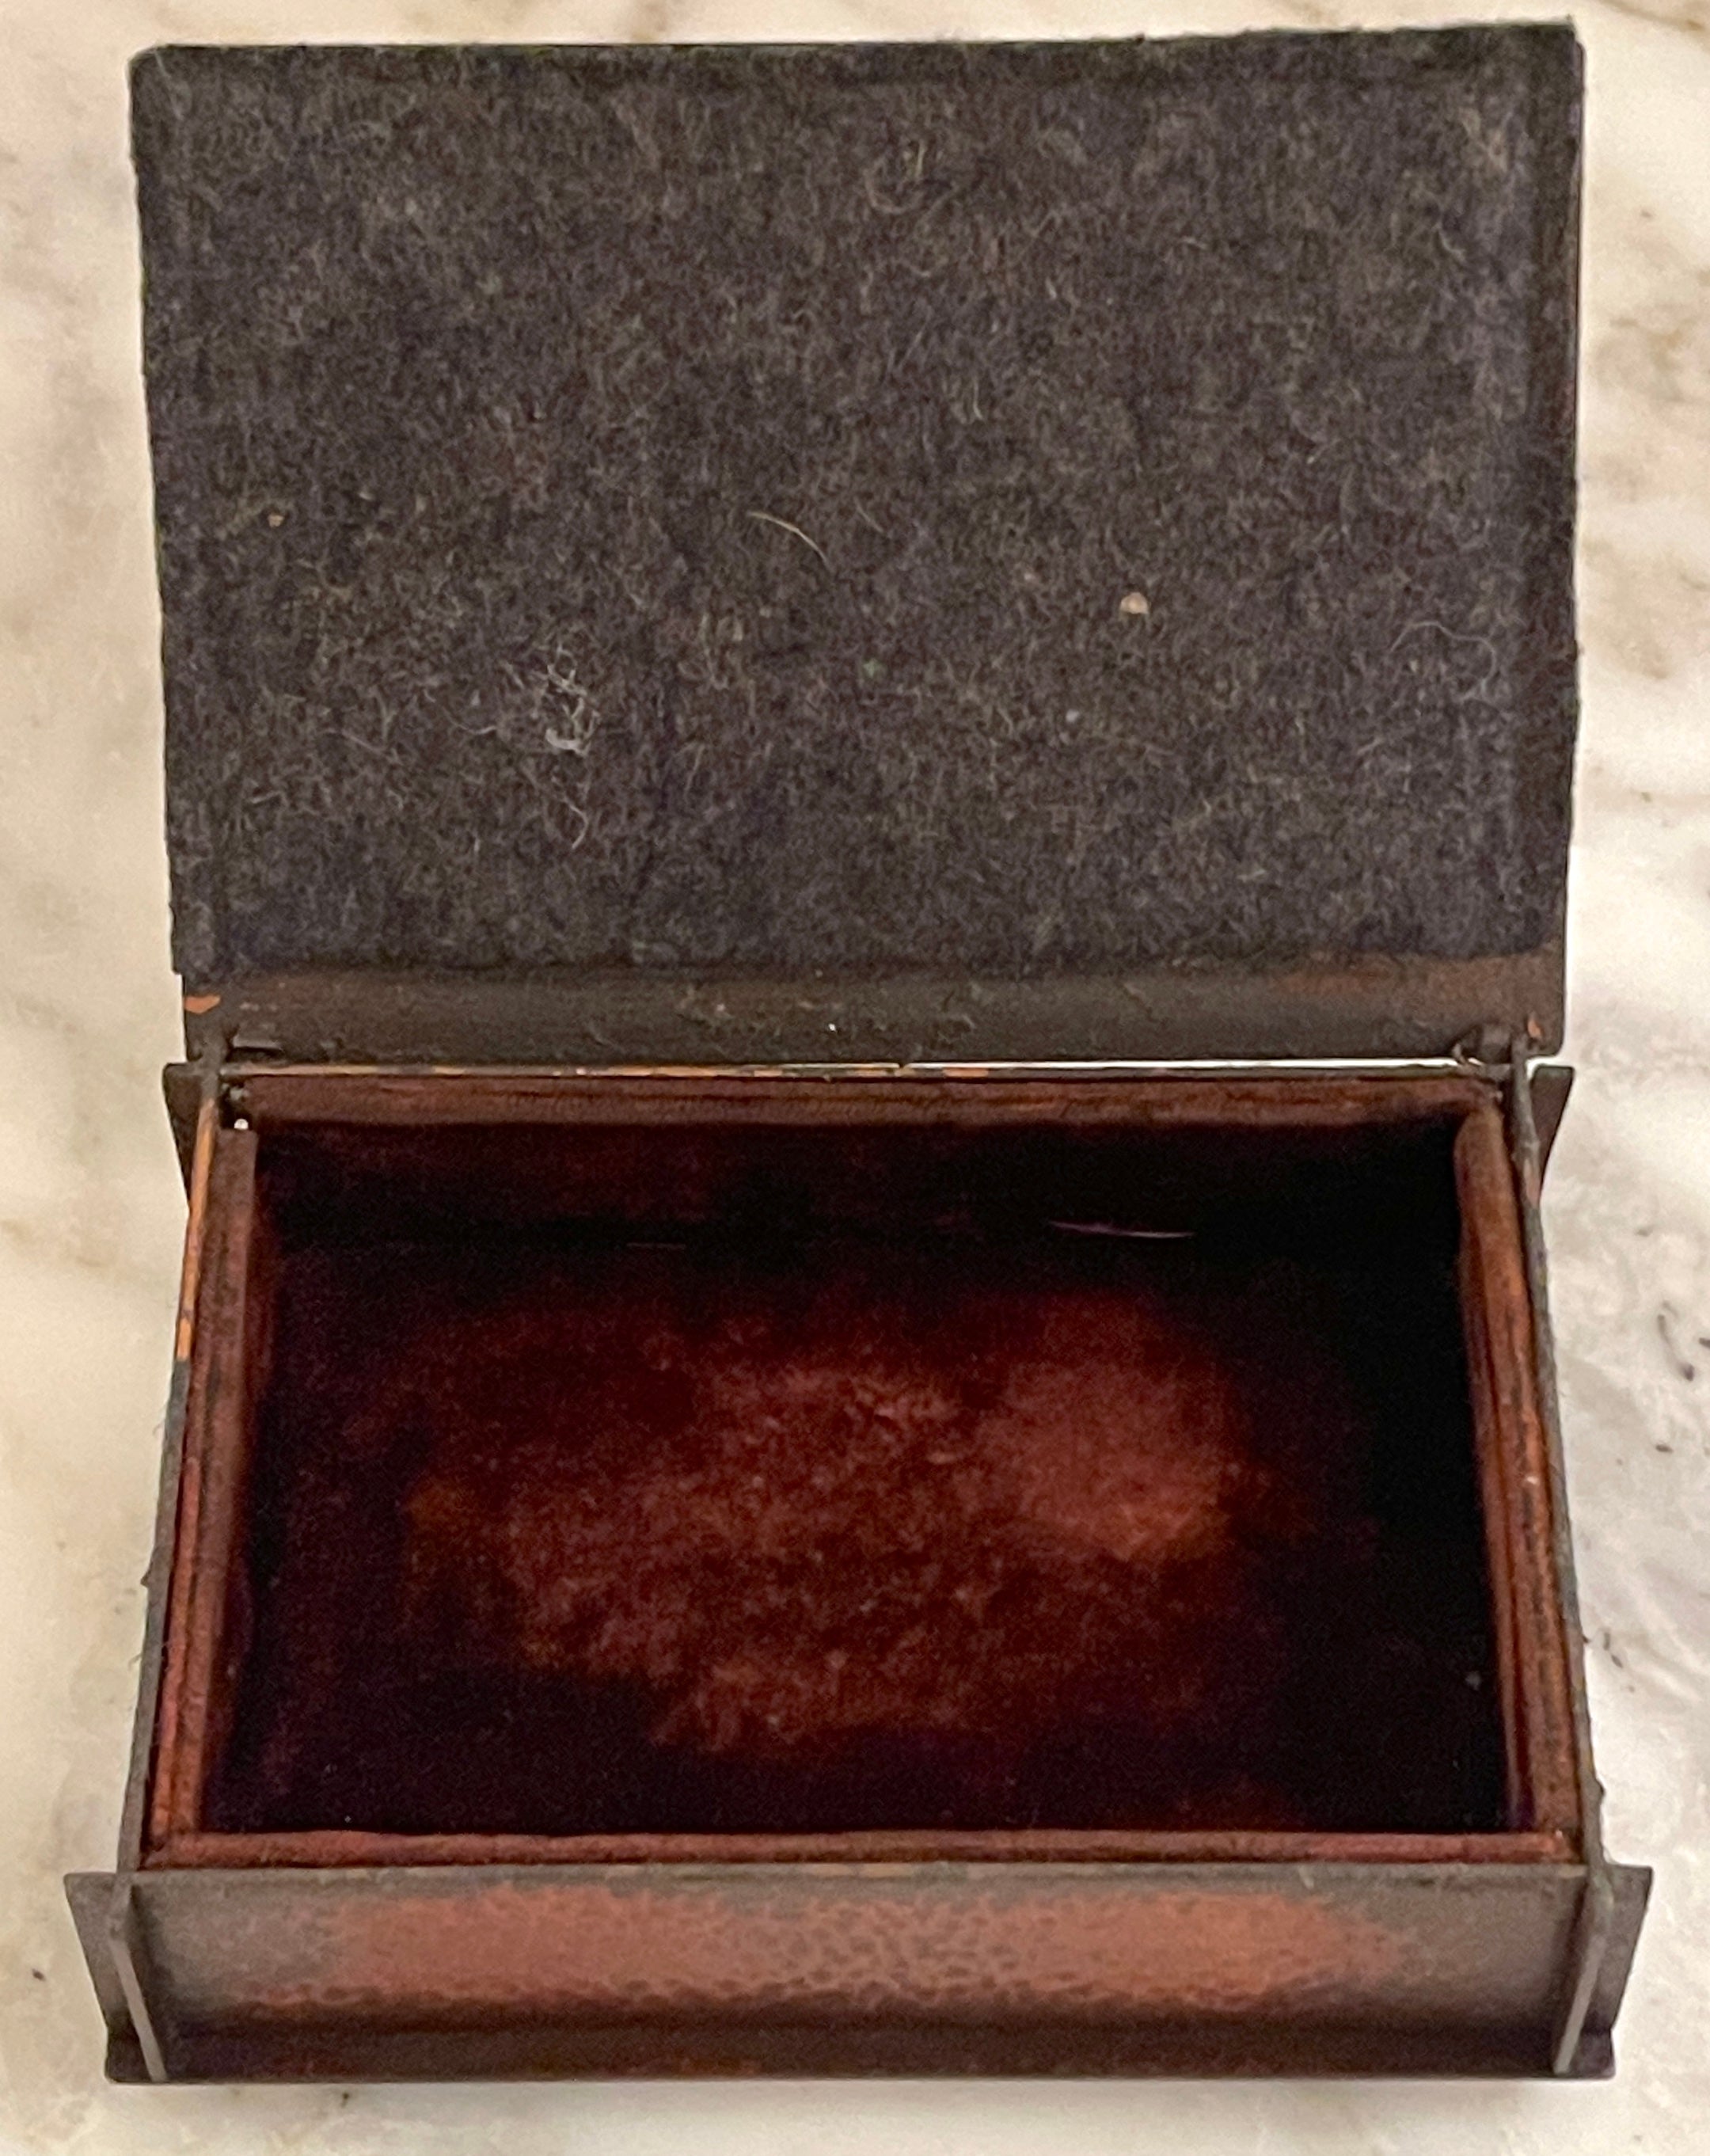 Arts and Crafts Roycroft Arts & Crafts Copper Table Box, from The Roycroft Inn at East Aurora NY For Sale